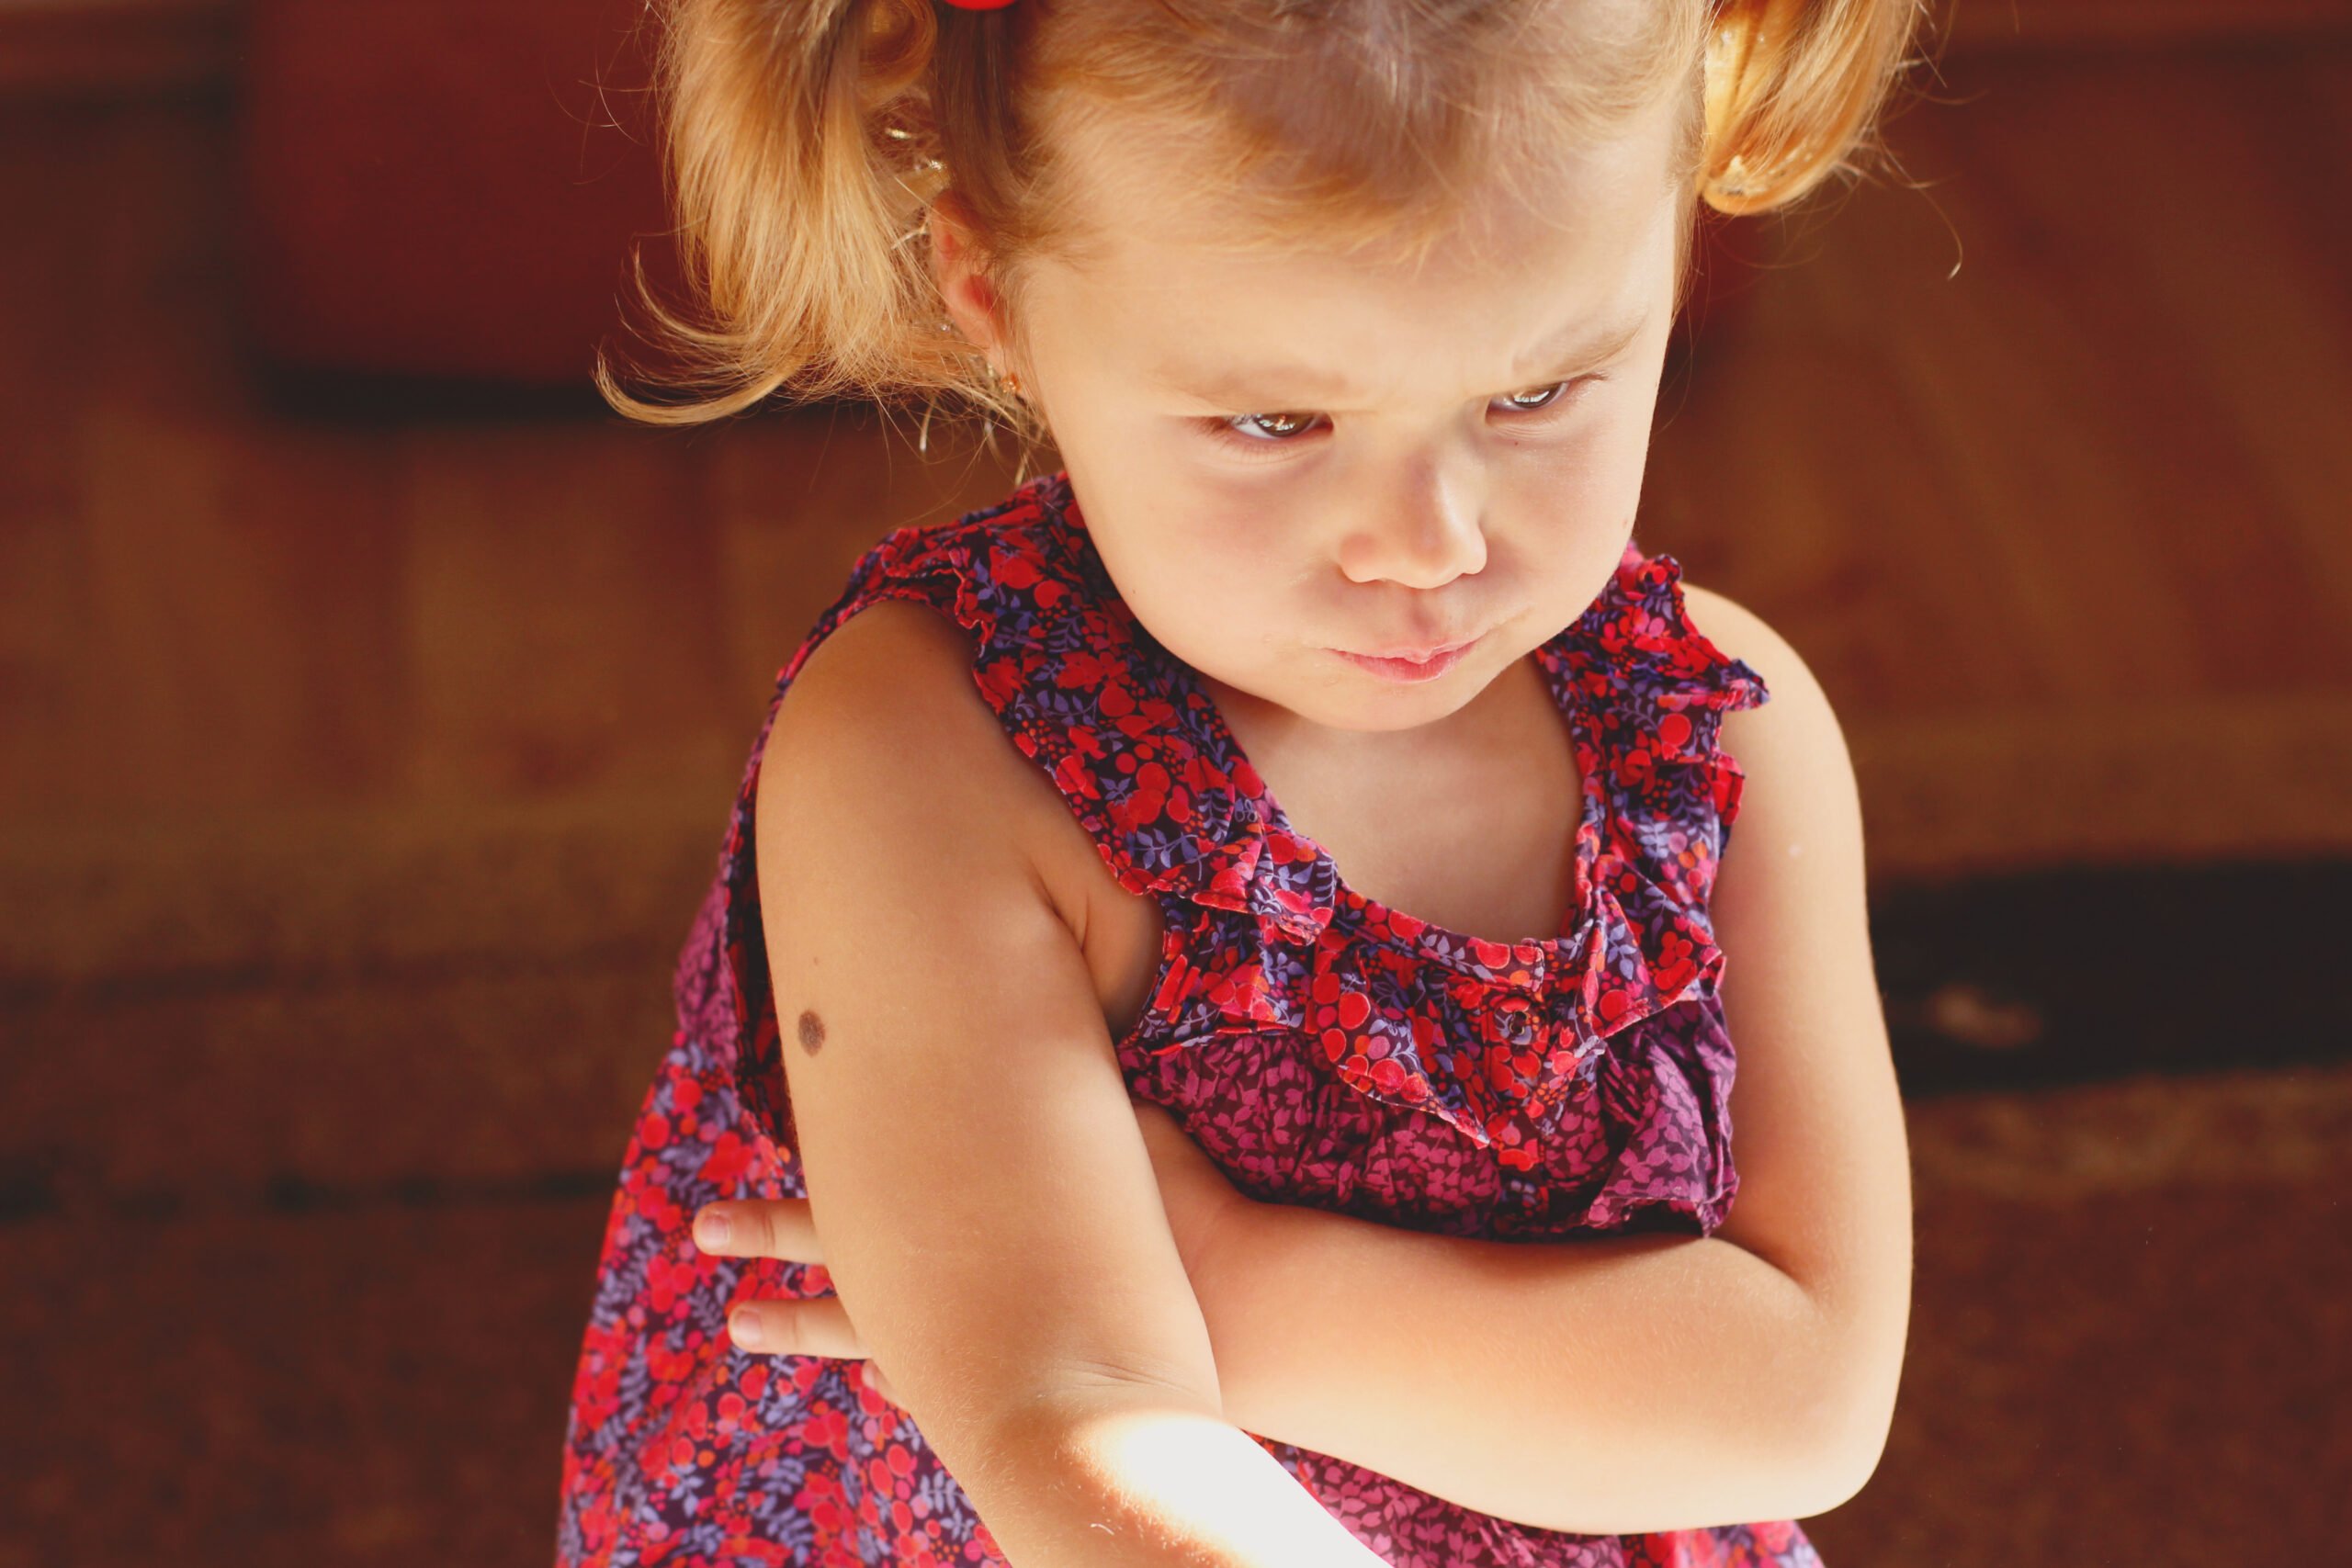 My Daughter Hates Me But Loves Her Dad: 10 Winning Solutions